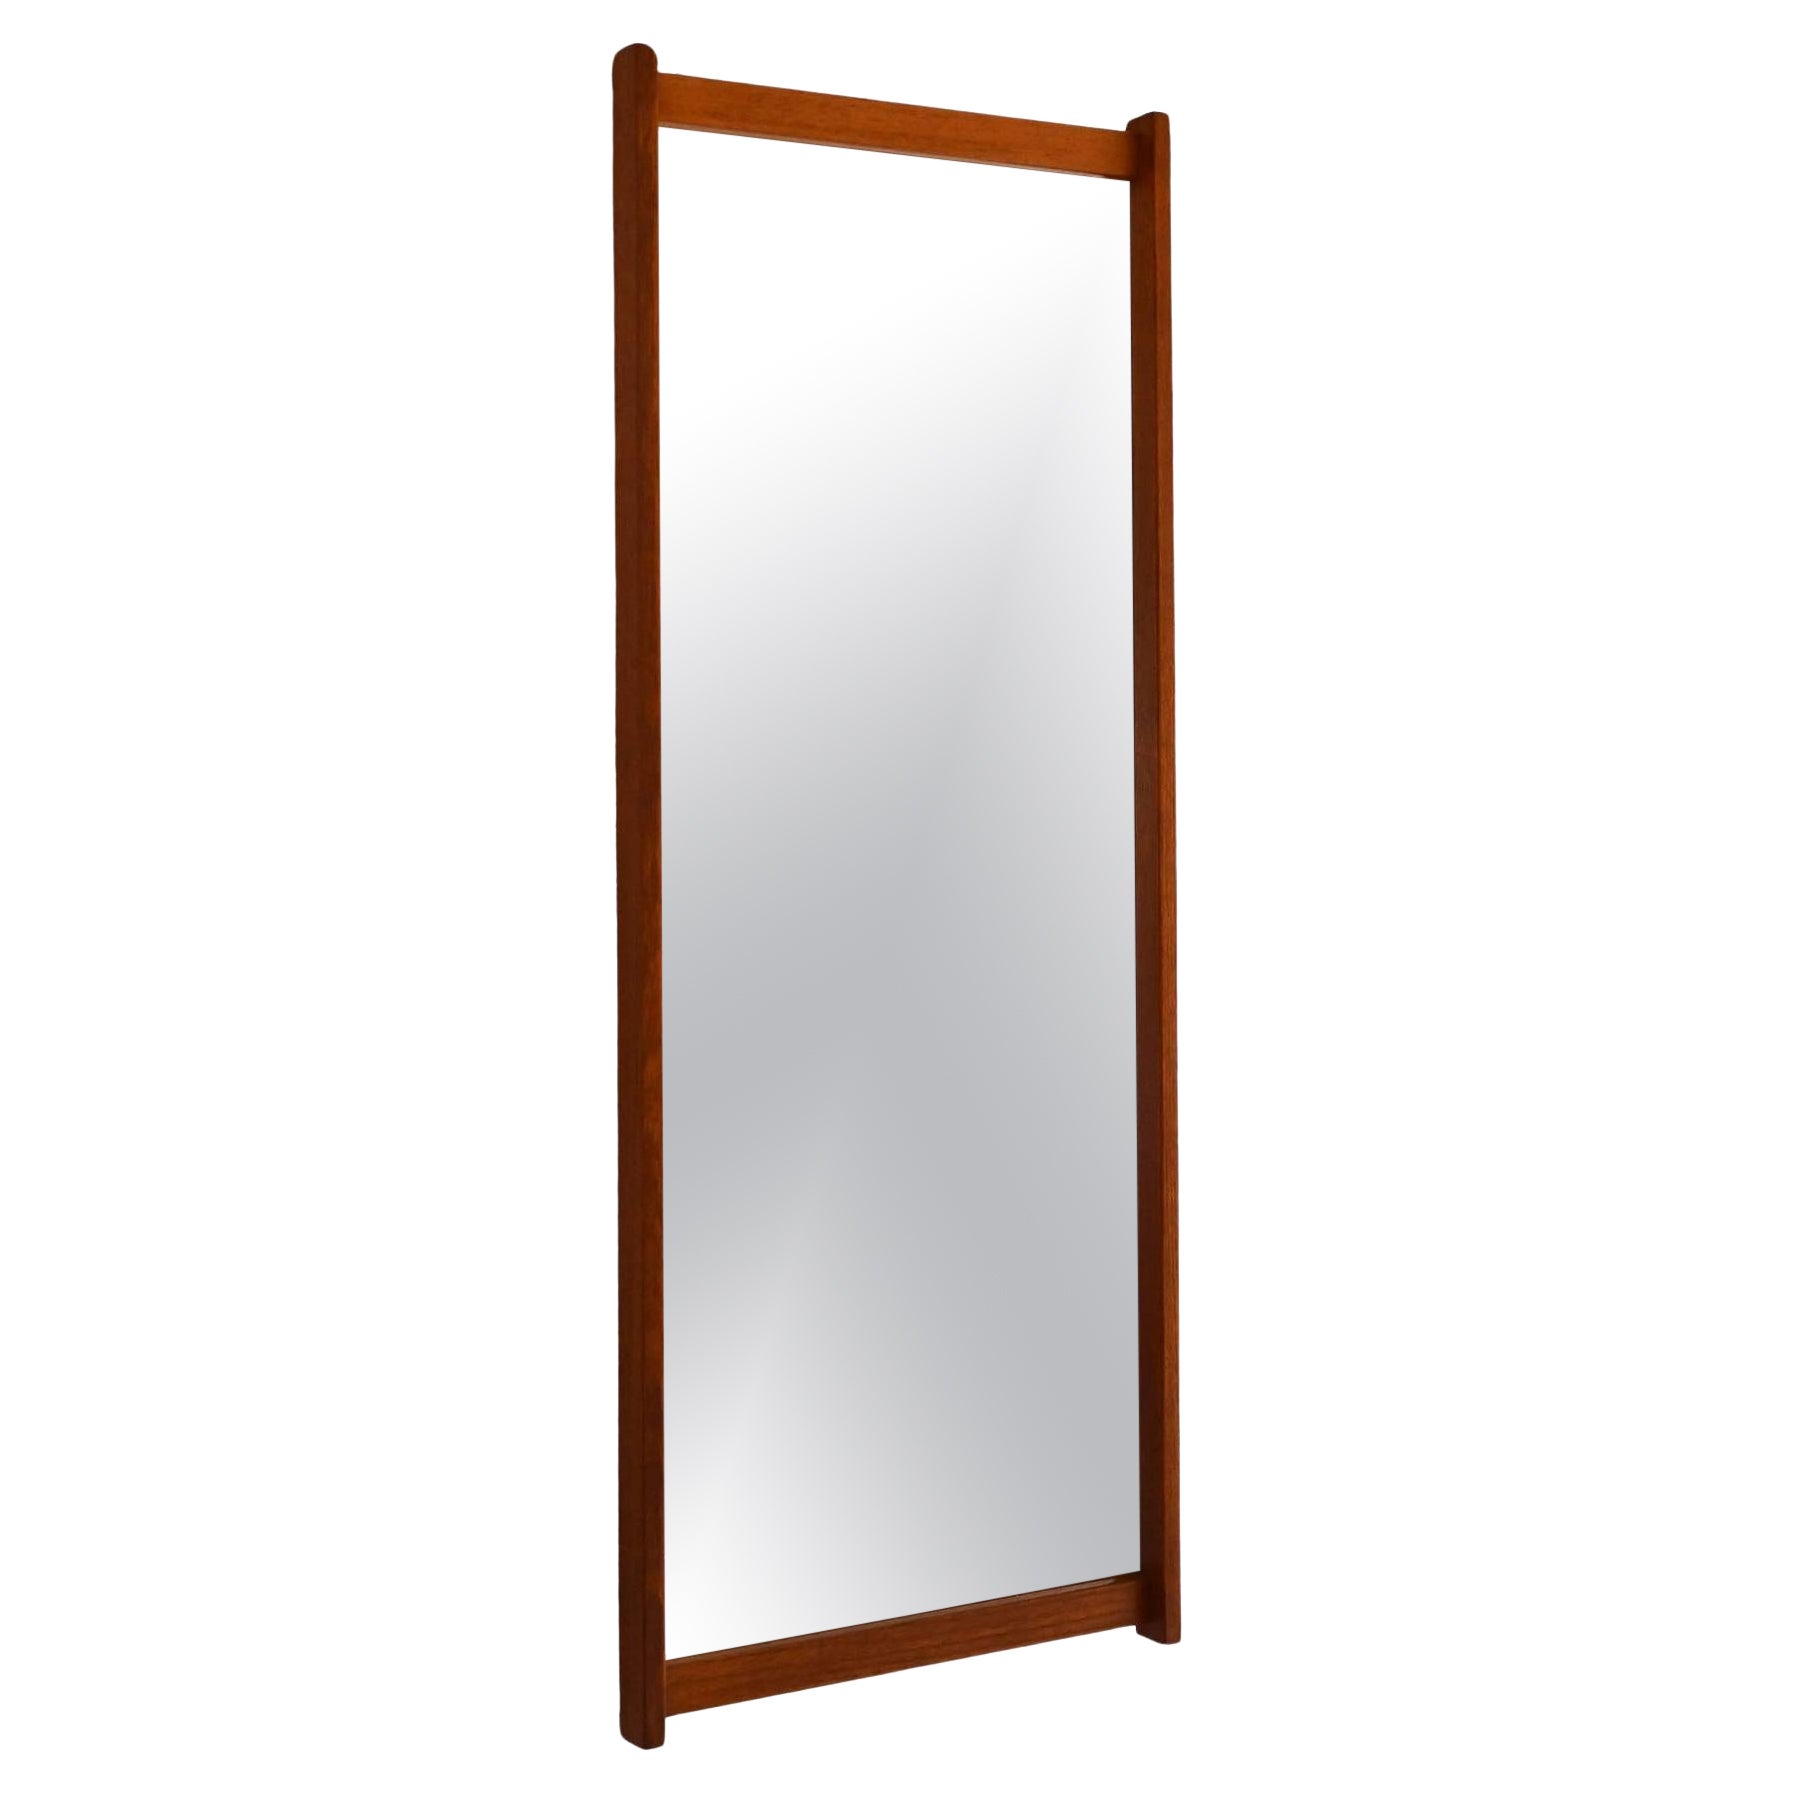 1960s mirror with wooden frame